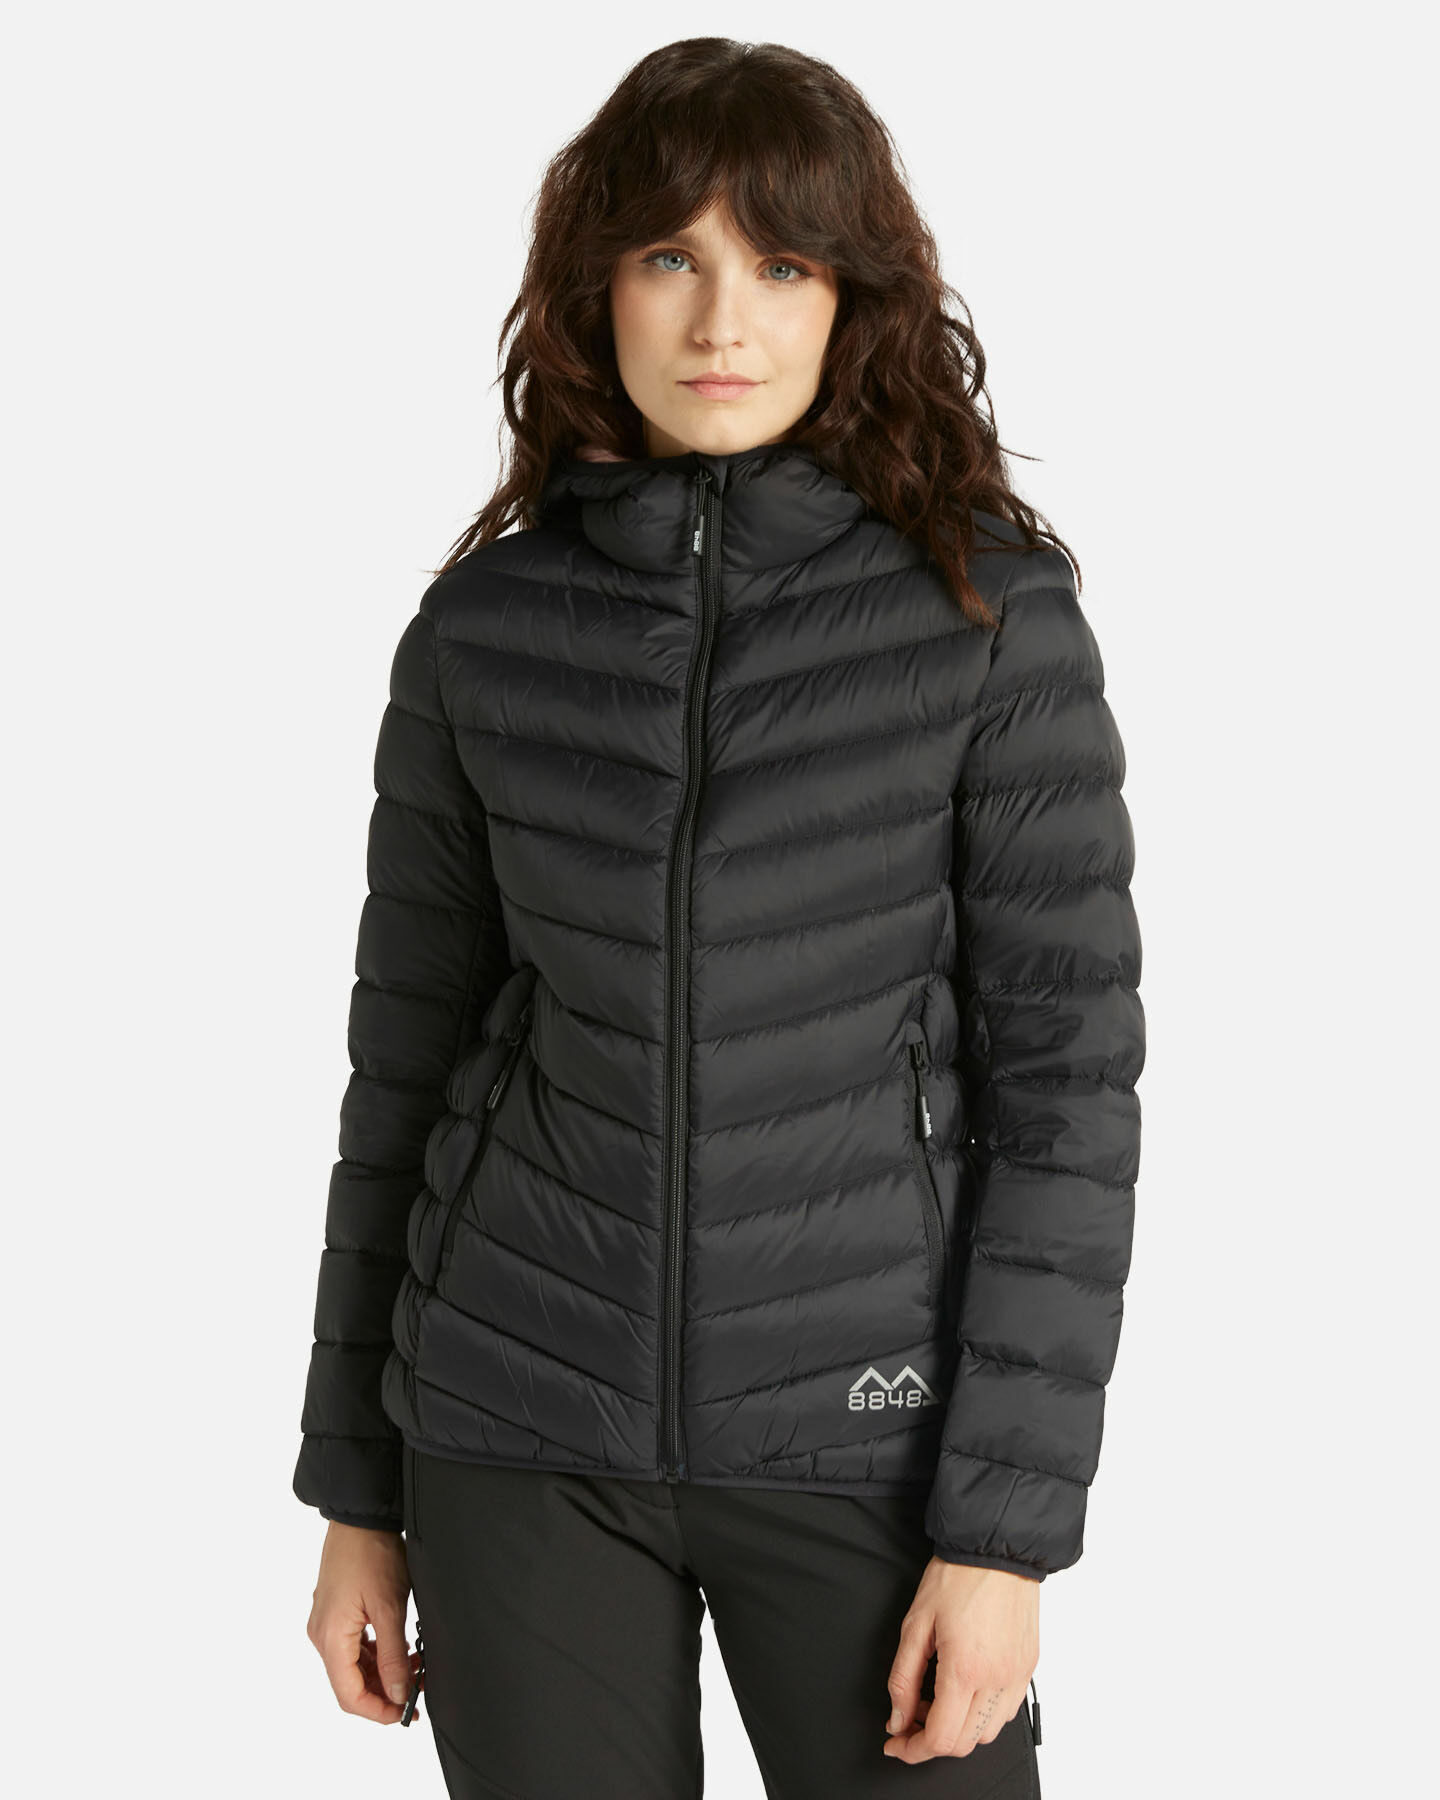 MOUNTAIN ESSENTIAL GIACCA DONNA NERA